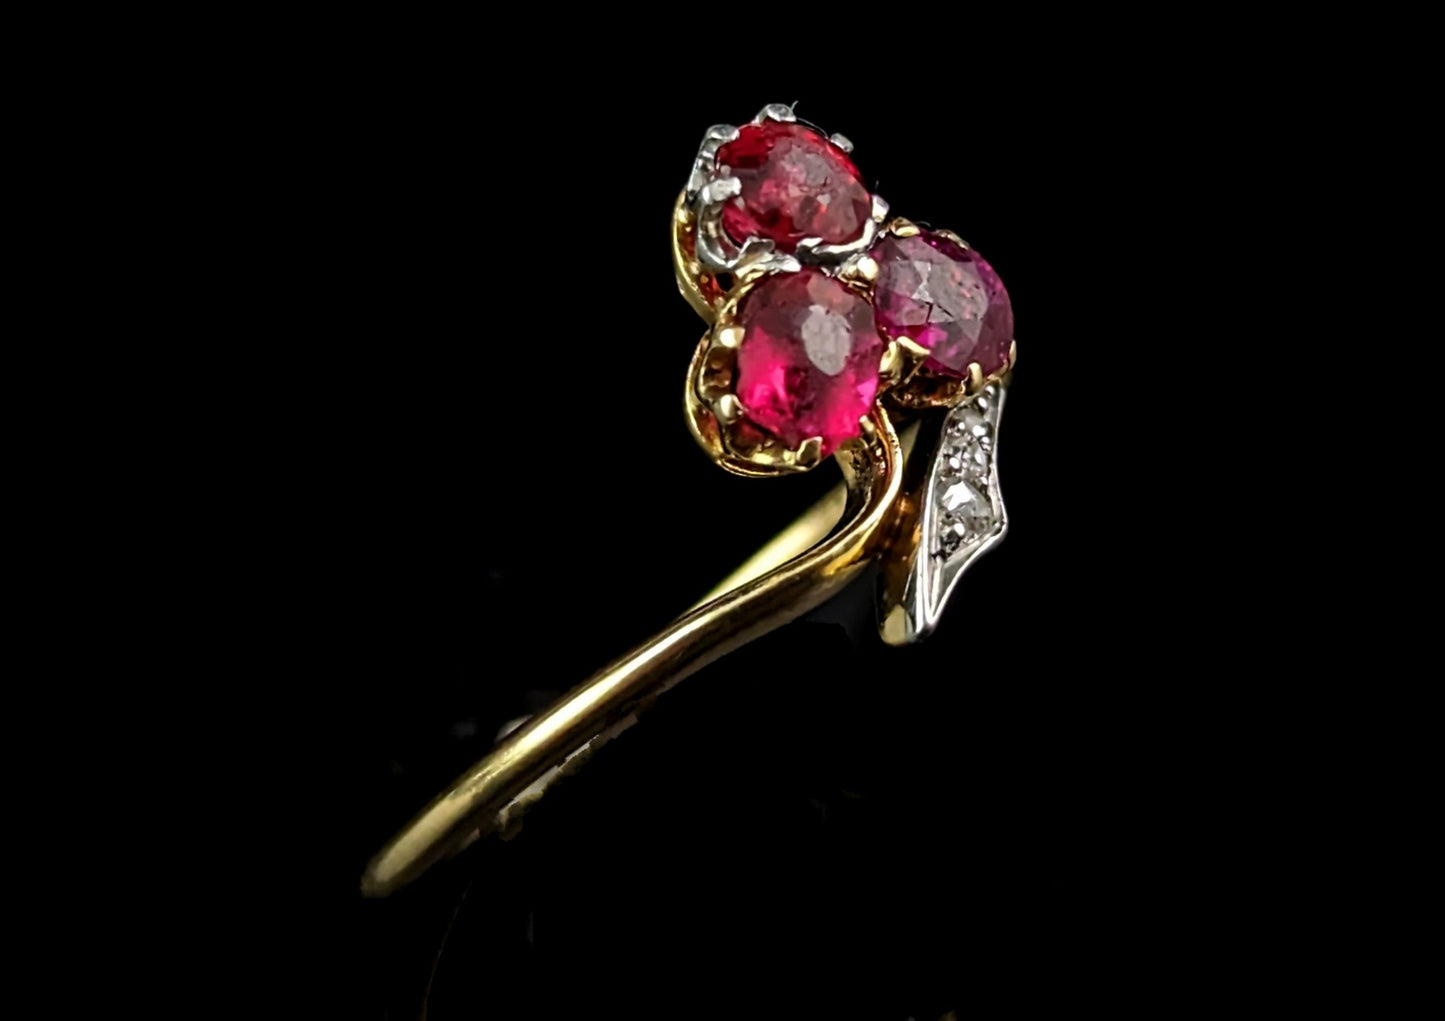 Antique At Nouveau Shamrock ring, Ruby, Diamond and Garnet doublet, 18ct gold and platinum